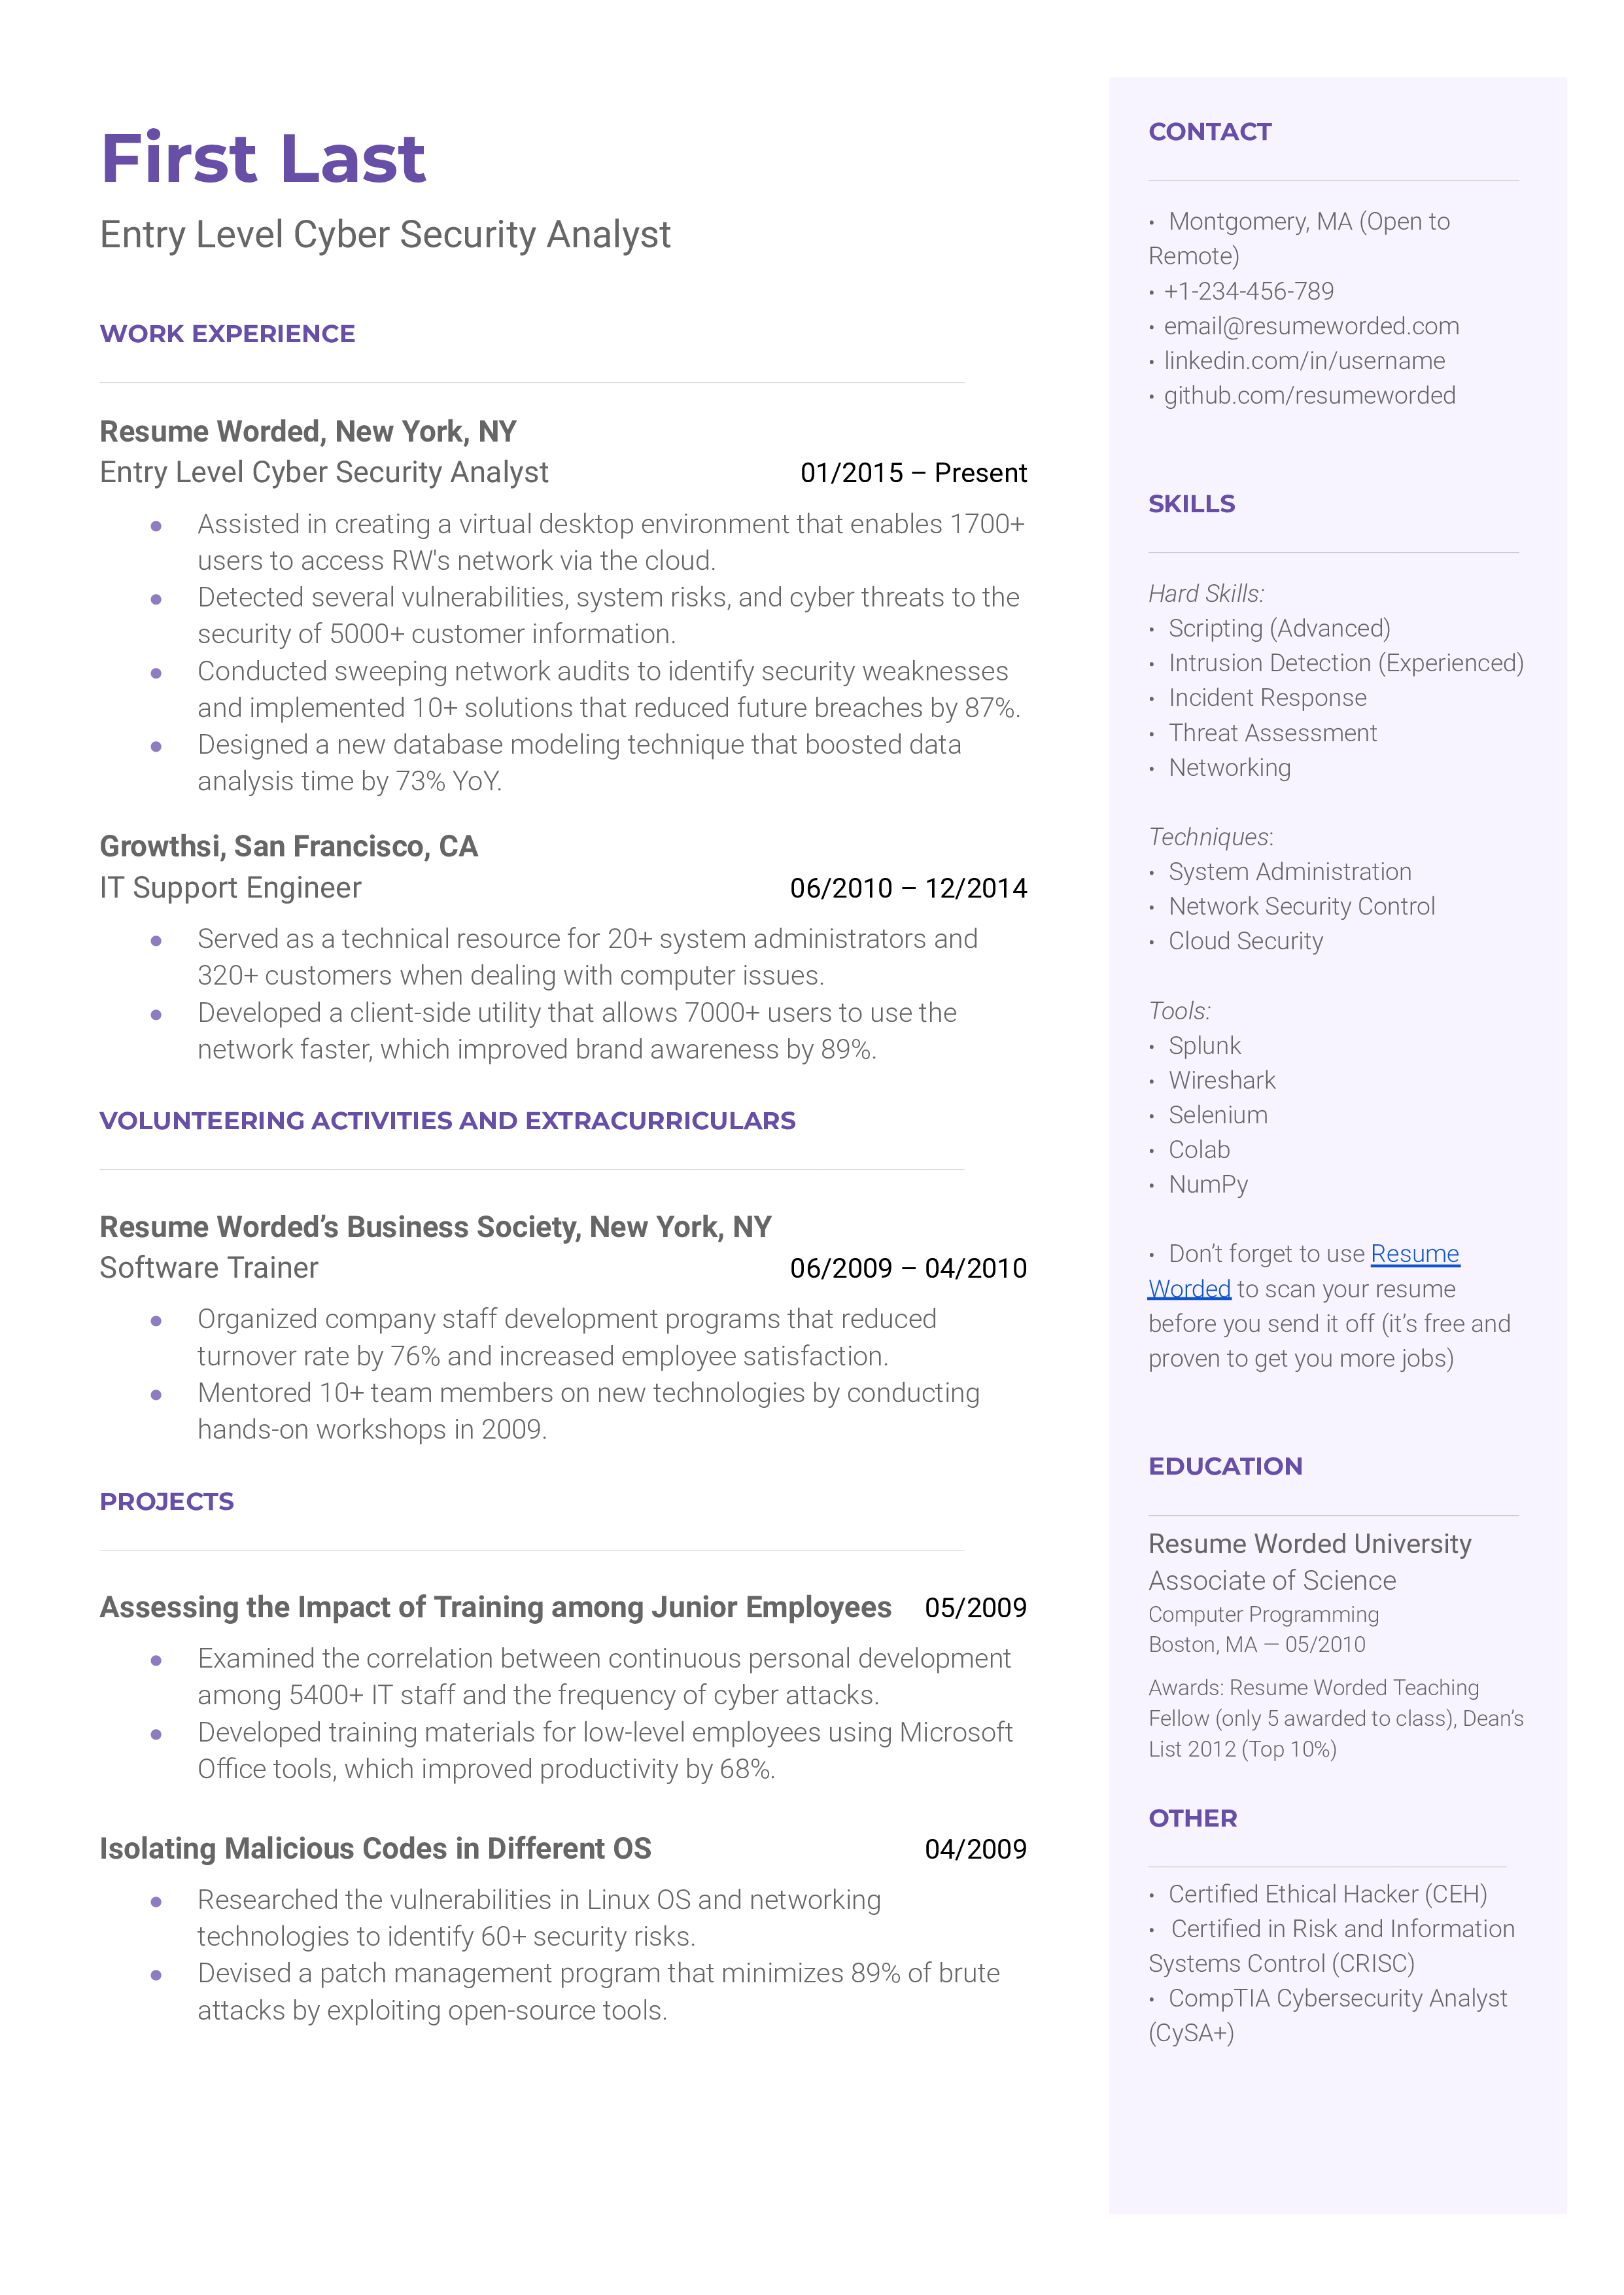 Entry-level cybersecurity analyst resume example